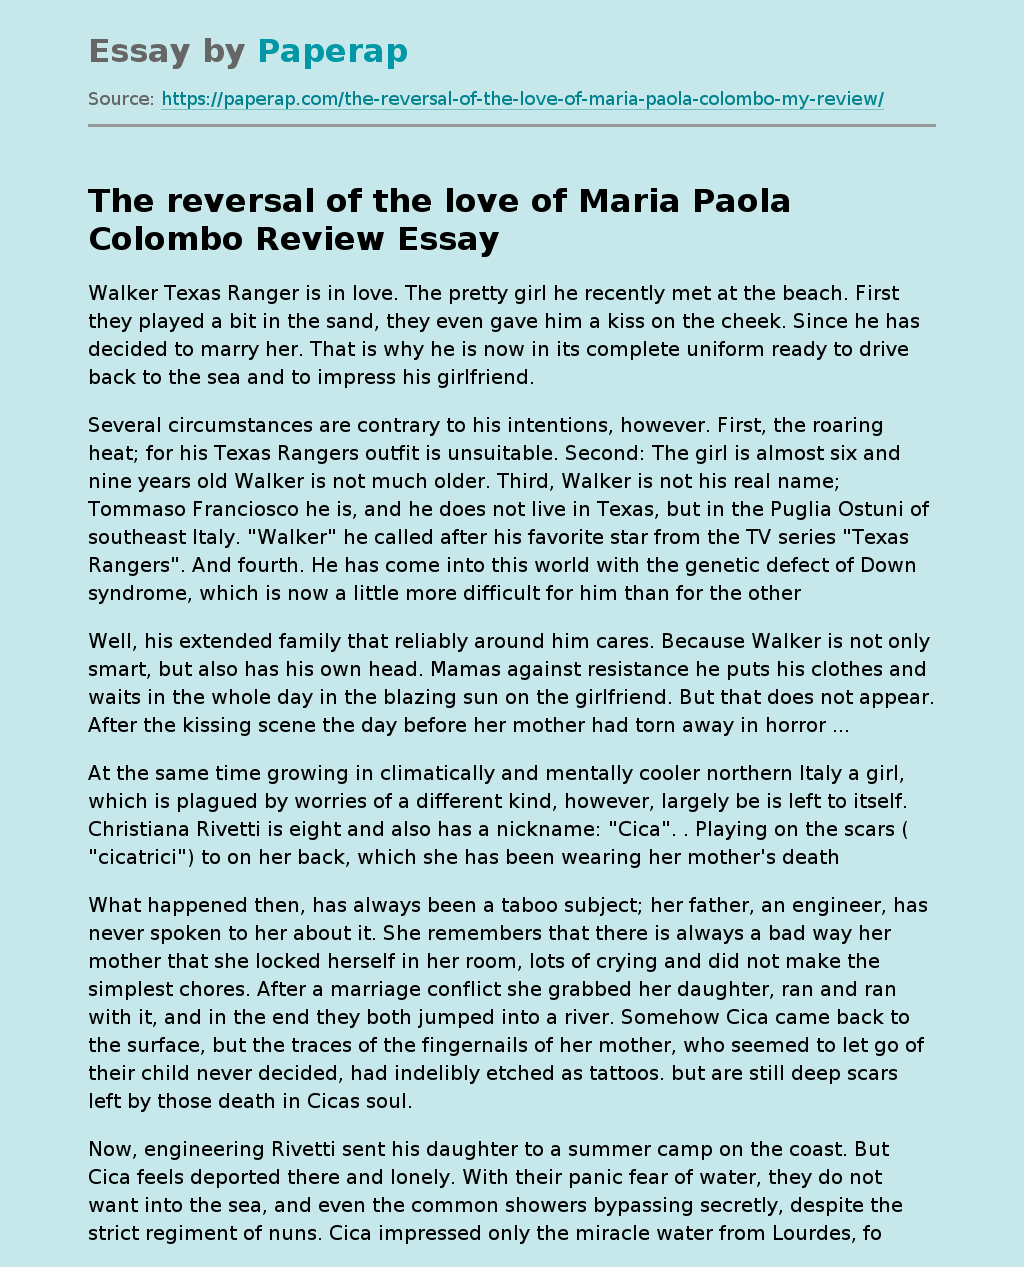 “The Reversal of the Love” of Maria Paola Colombo